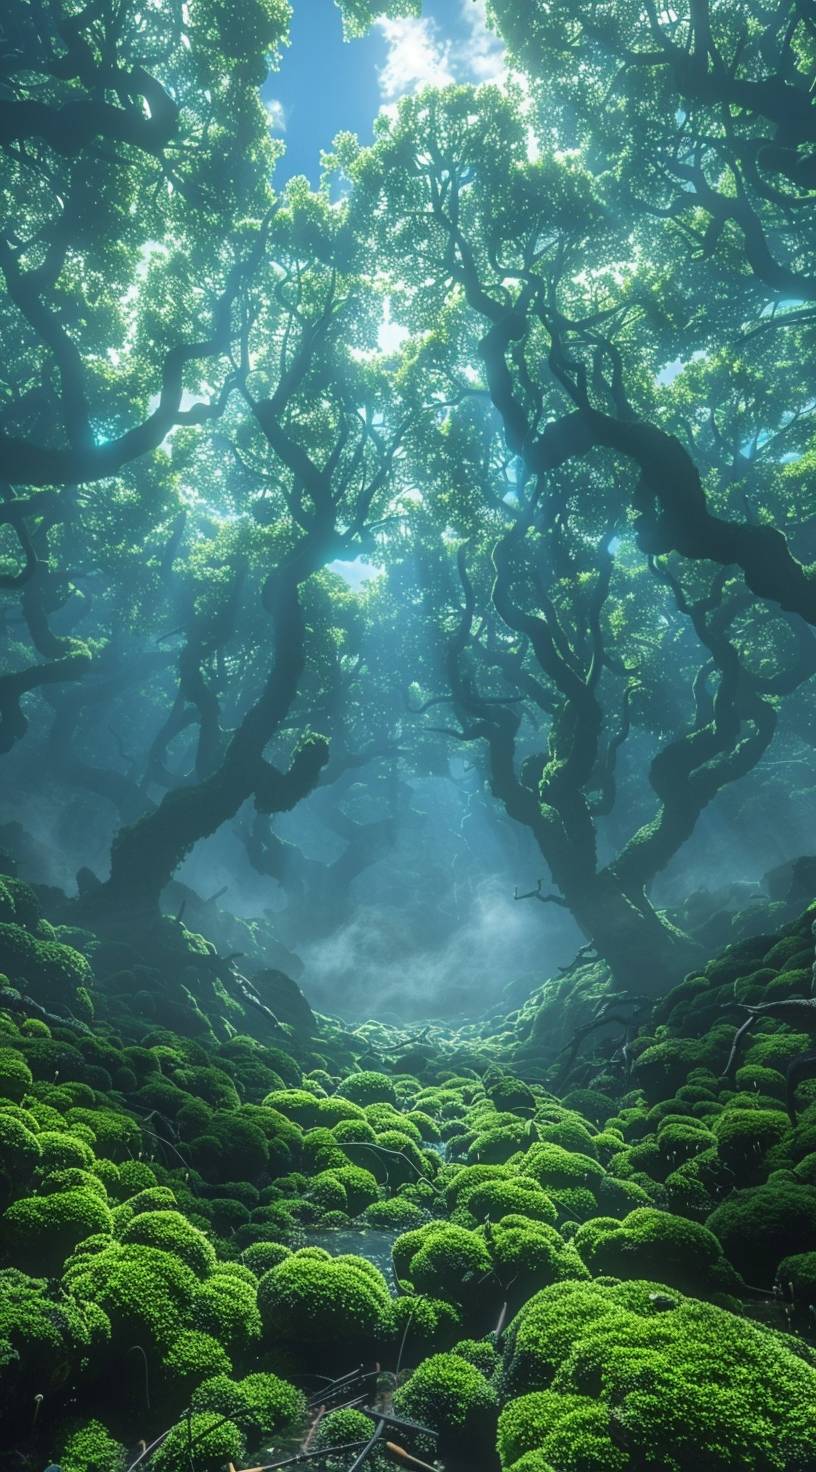 A mysterious space in a deep, humus, quiet forest with moss-covered fallen trees, bright style, adventure vibe, dust, mycelium and puddles, anime style, key visual, sky